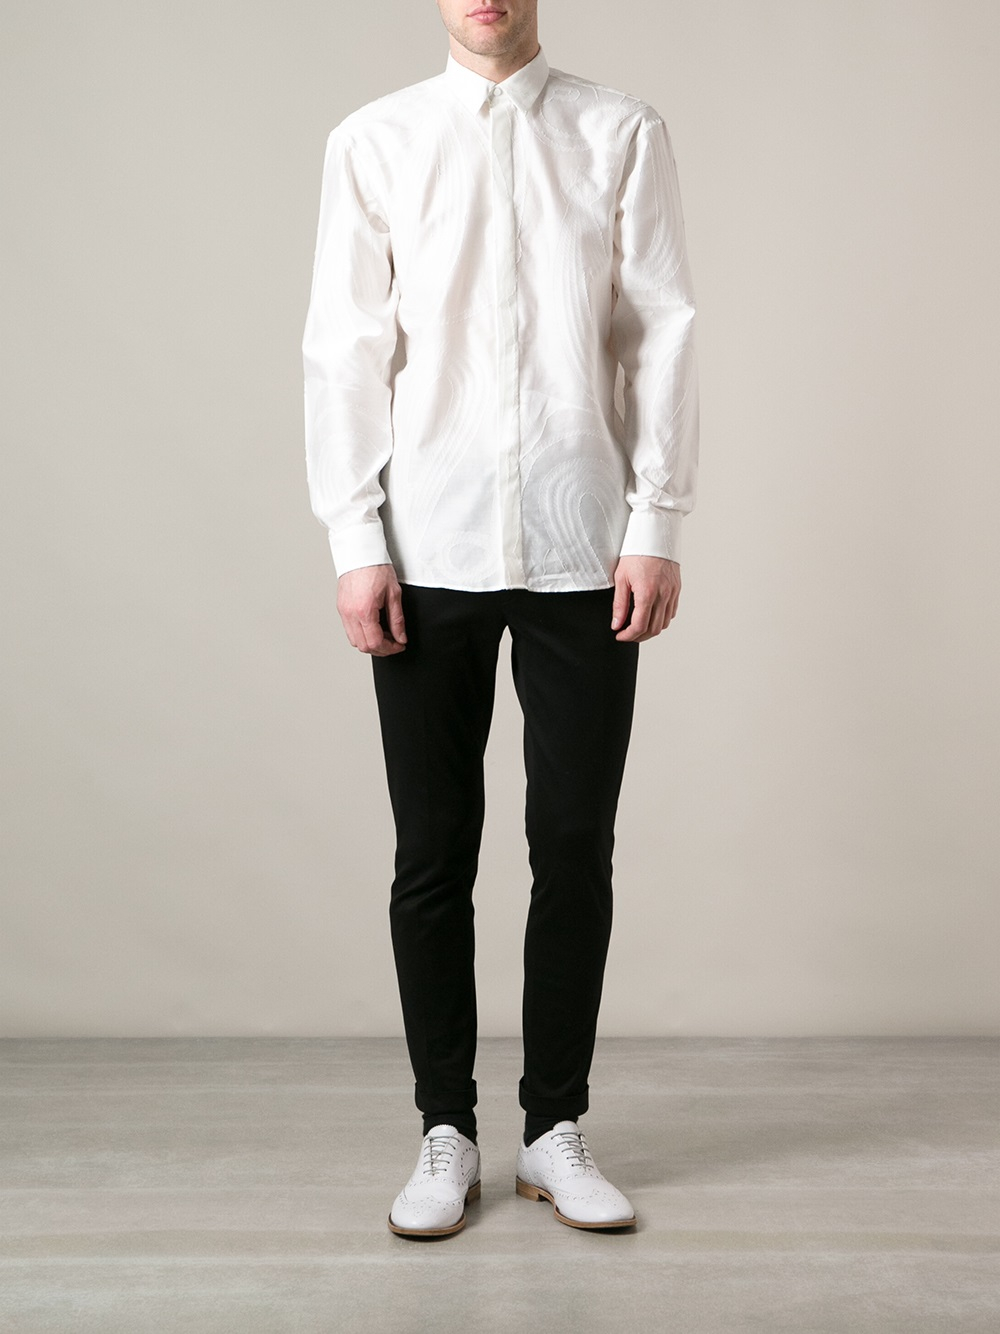 Lyst - Cerruti 1881 Embroidered Shirt in White for Men